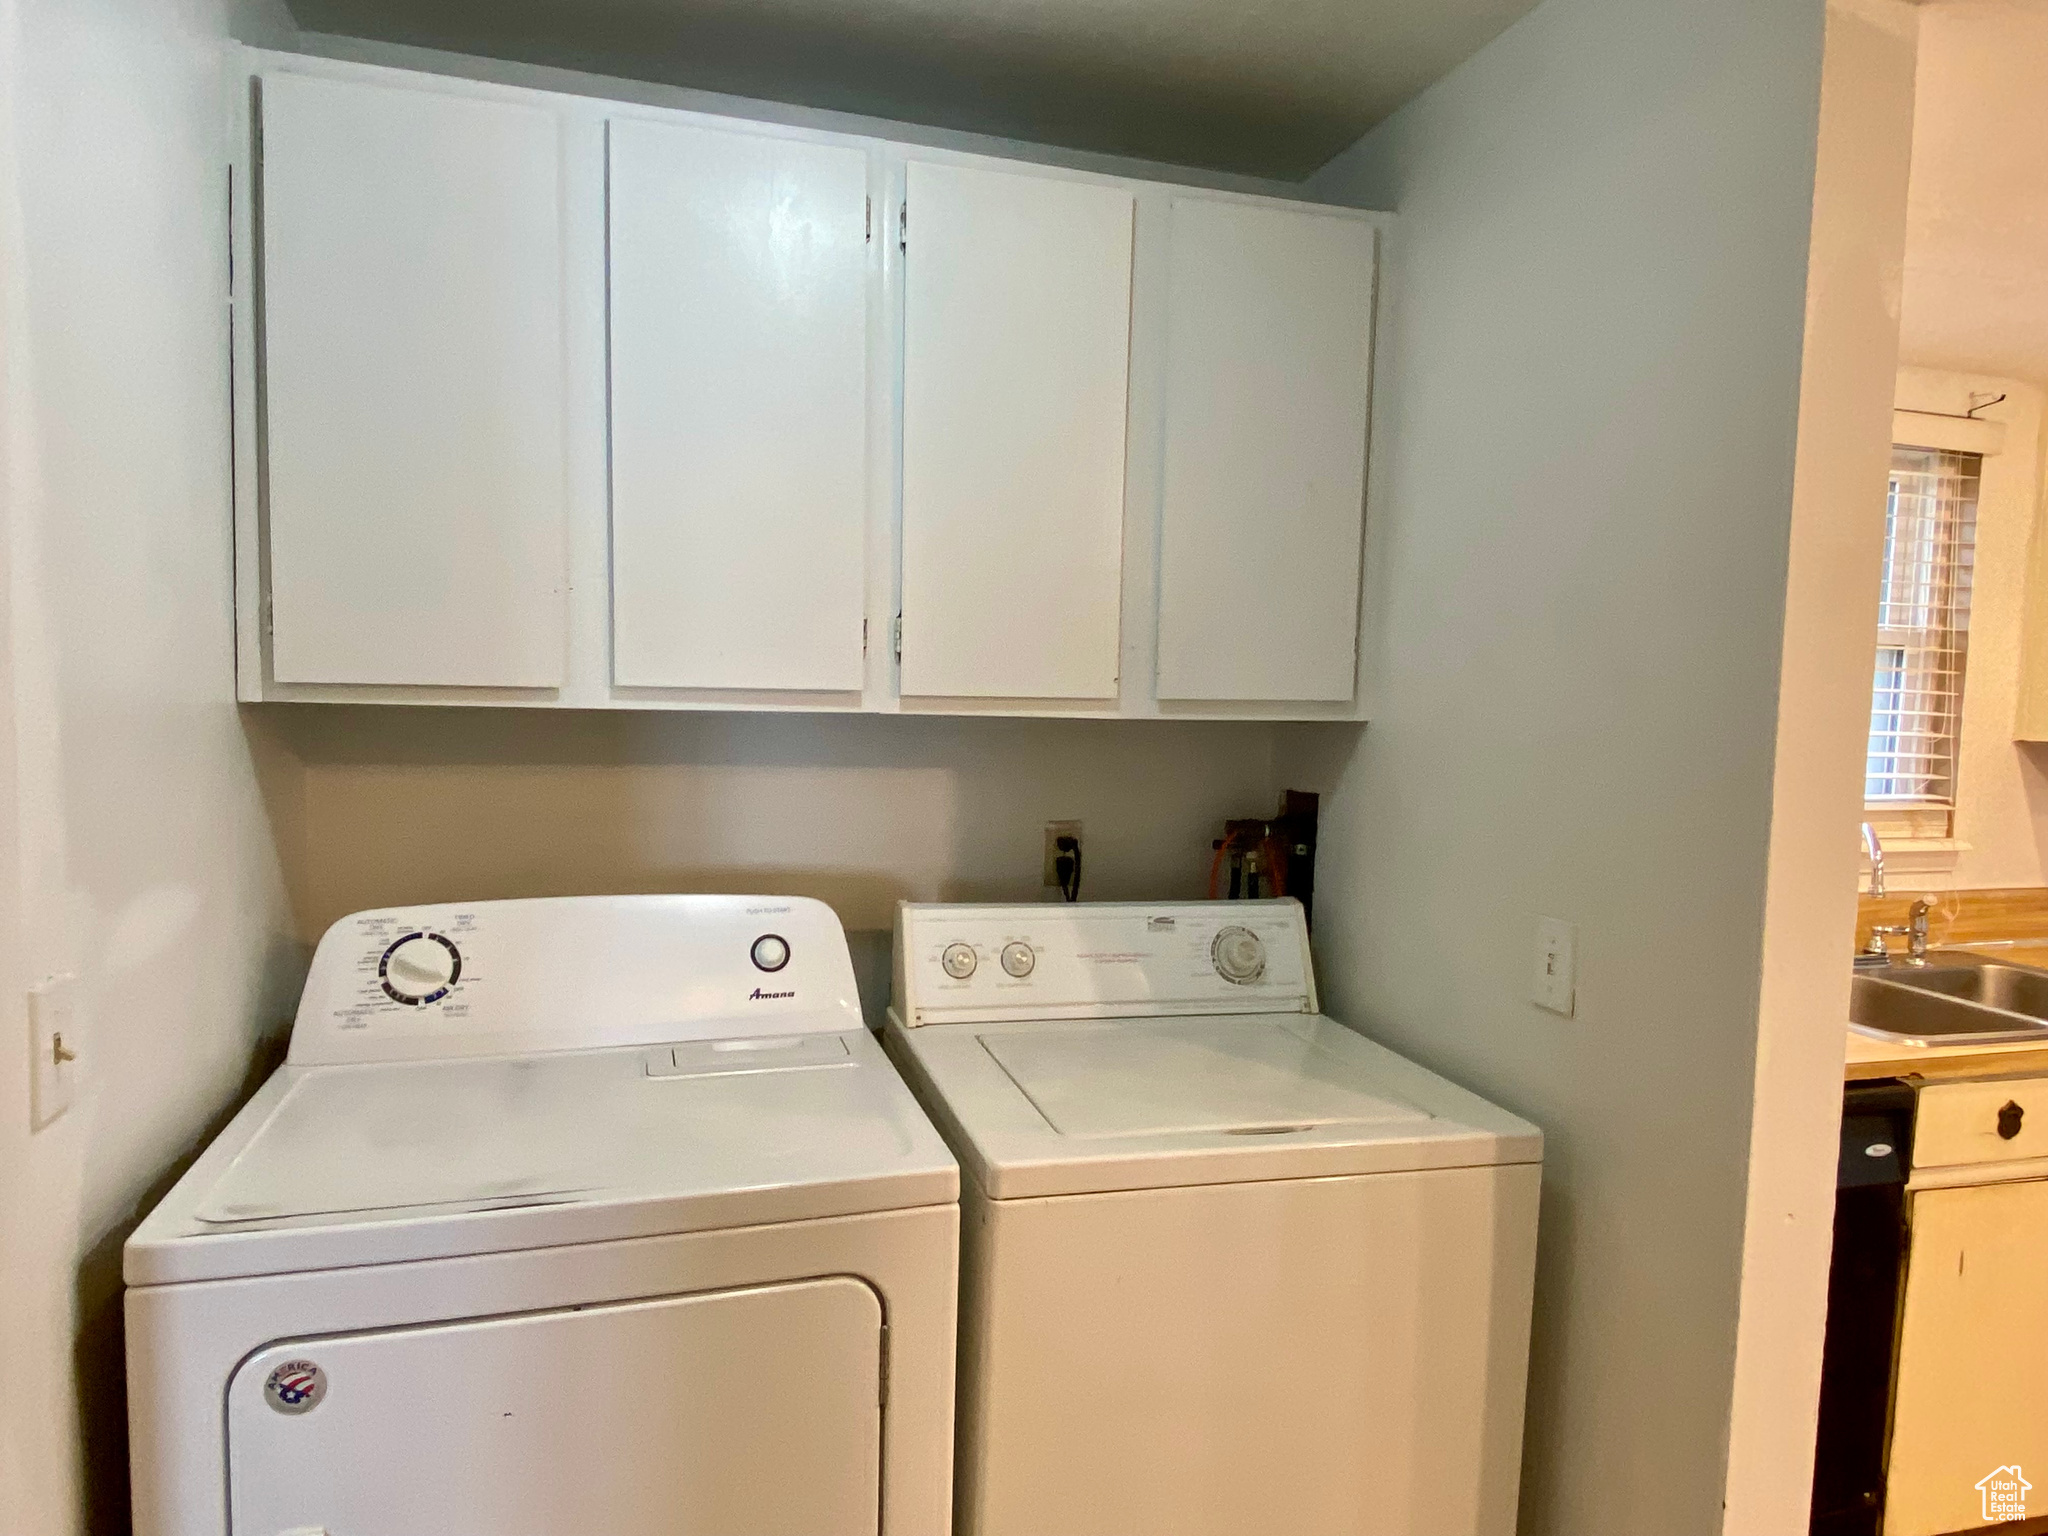 Clothes washing area with cabinets, washer and clothes dryer, and sink